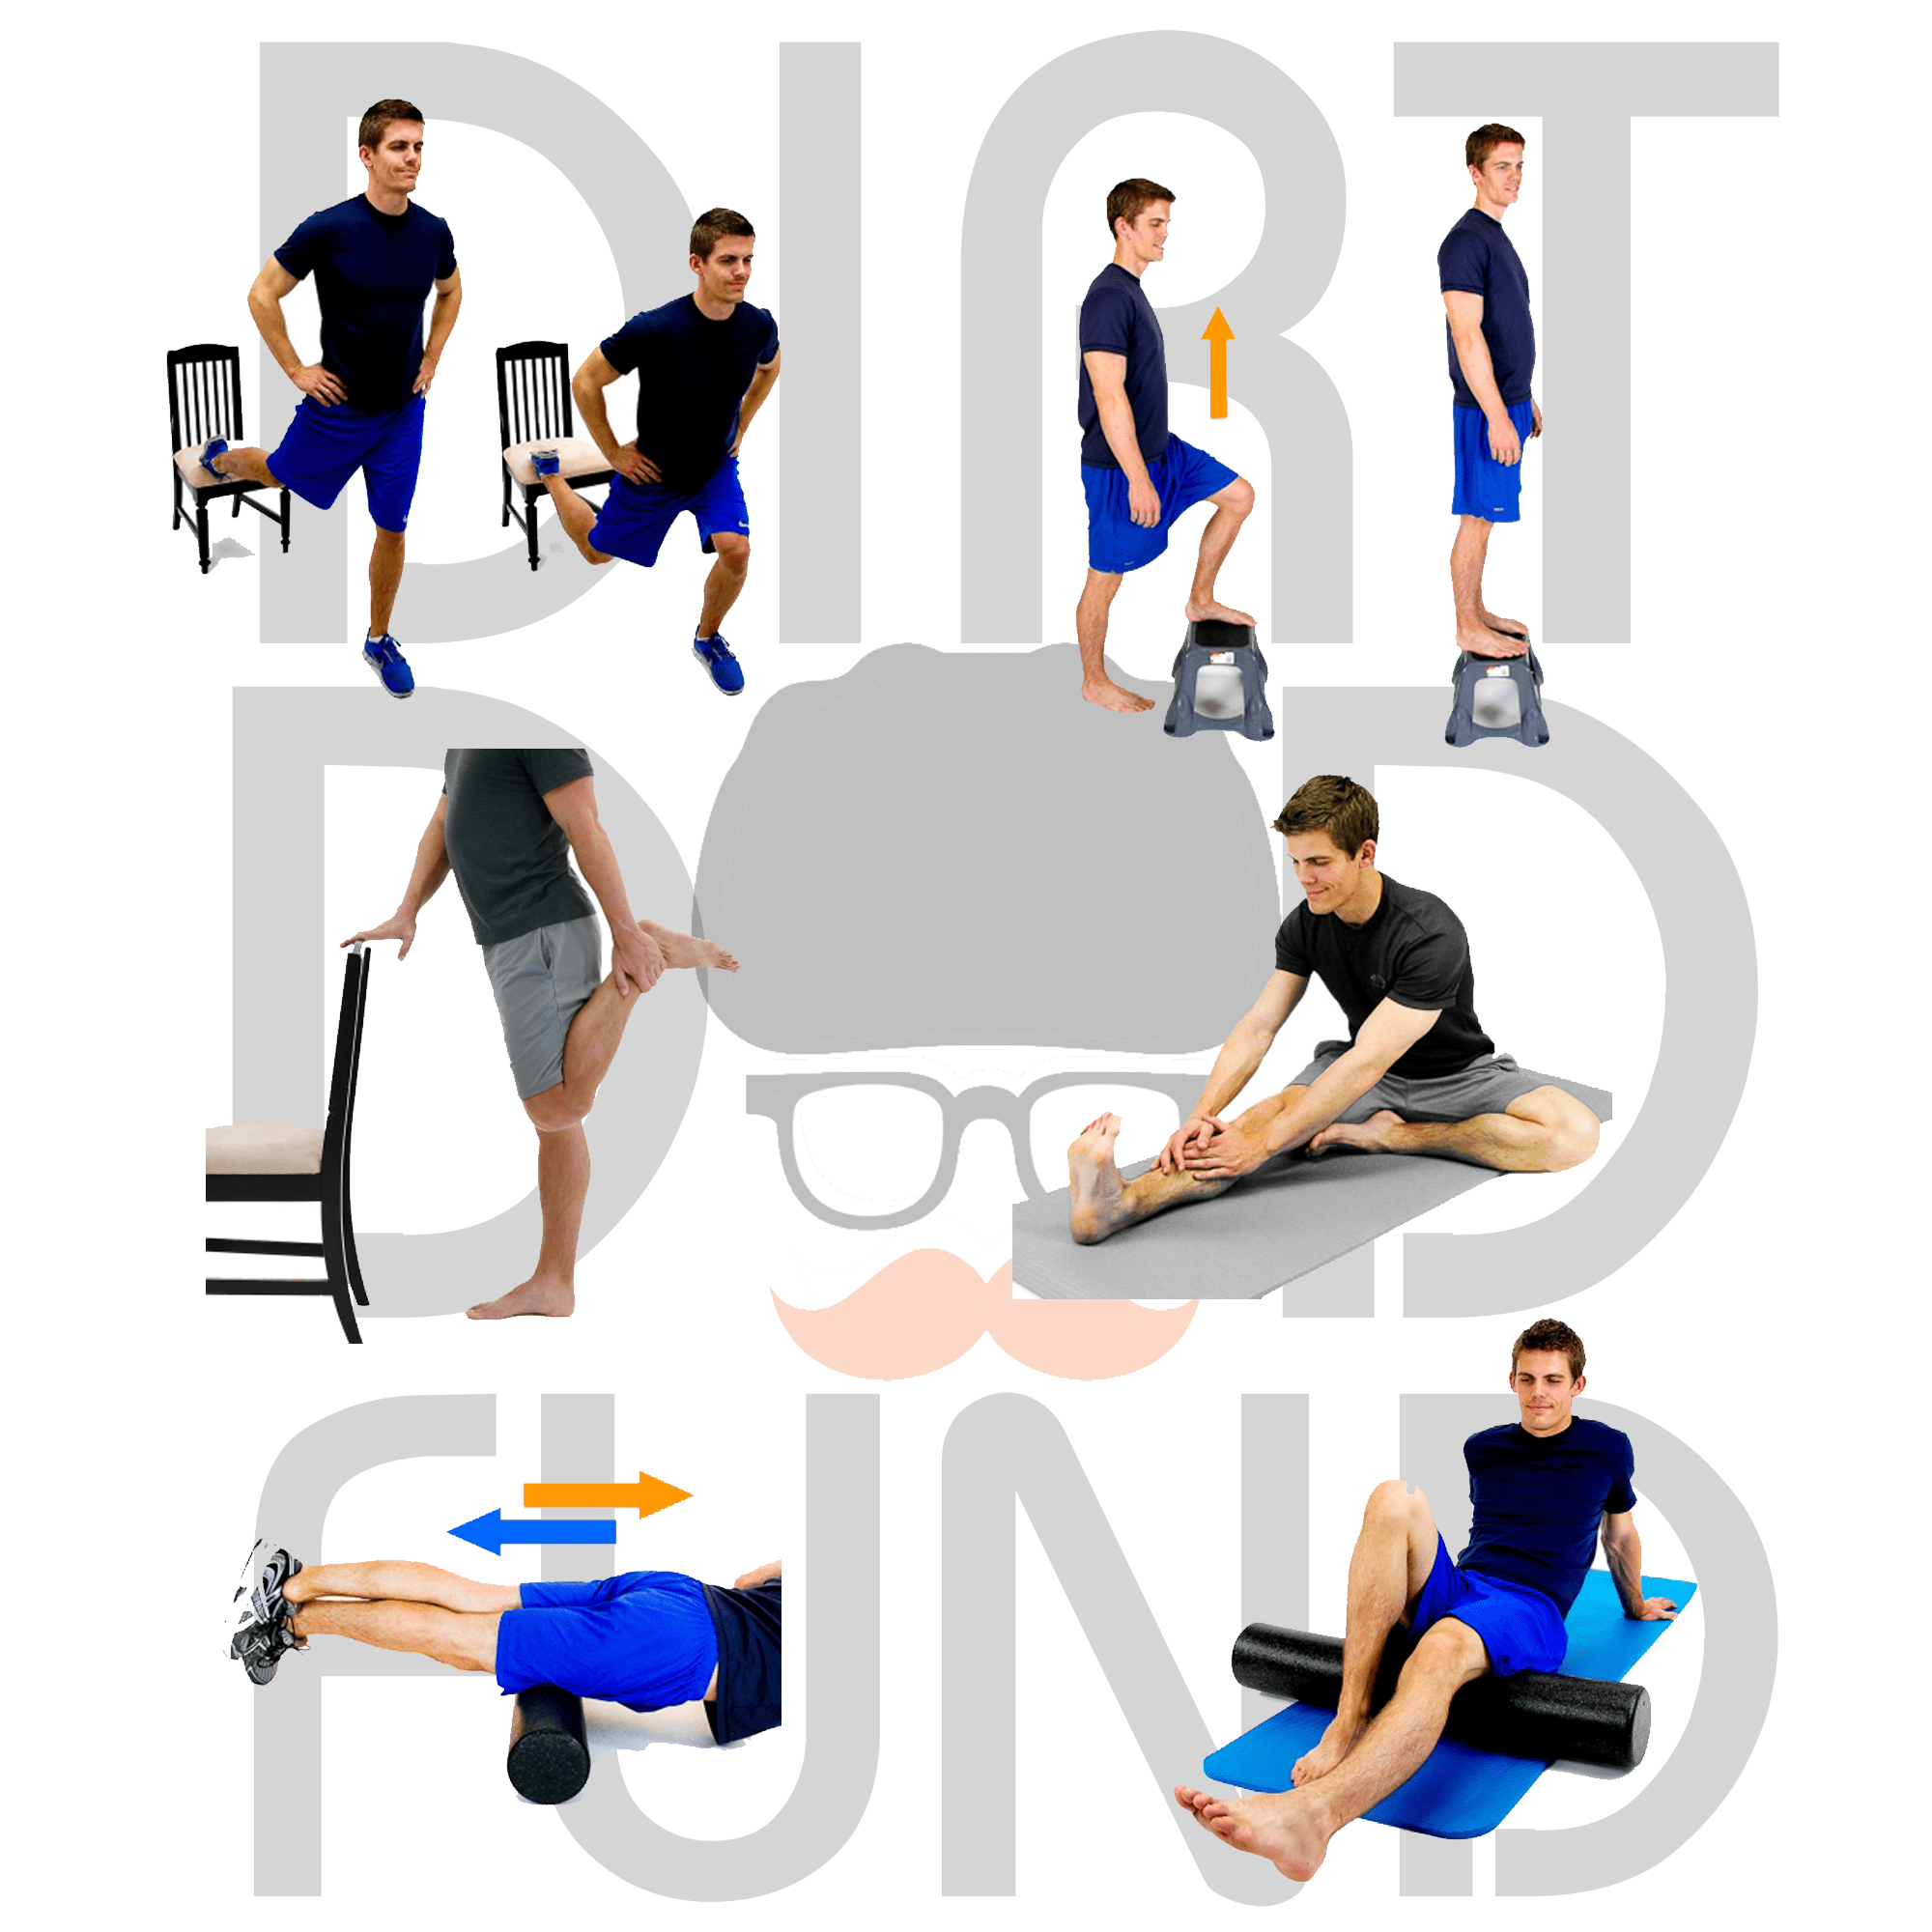 exercise program to address pain in the front of the knee when cycling